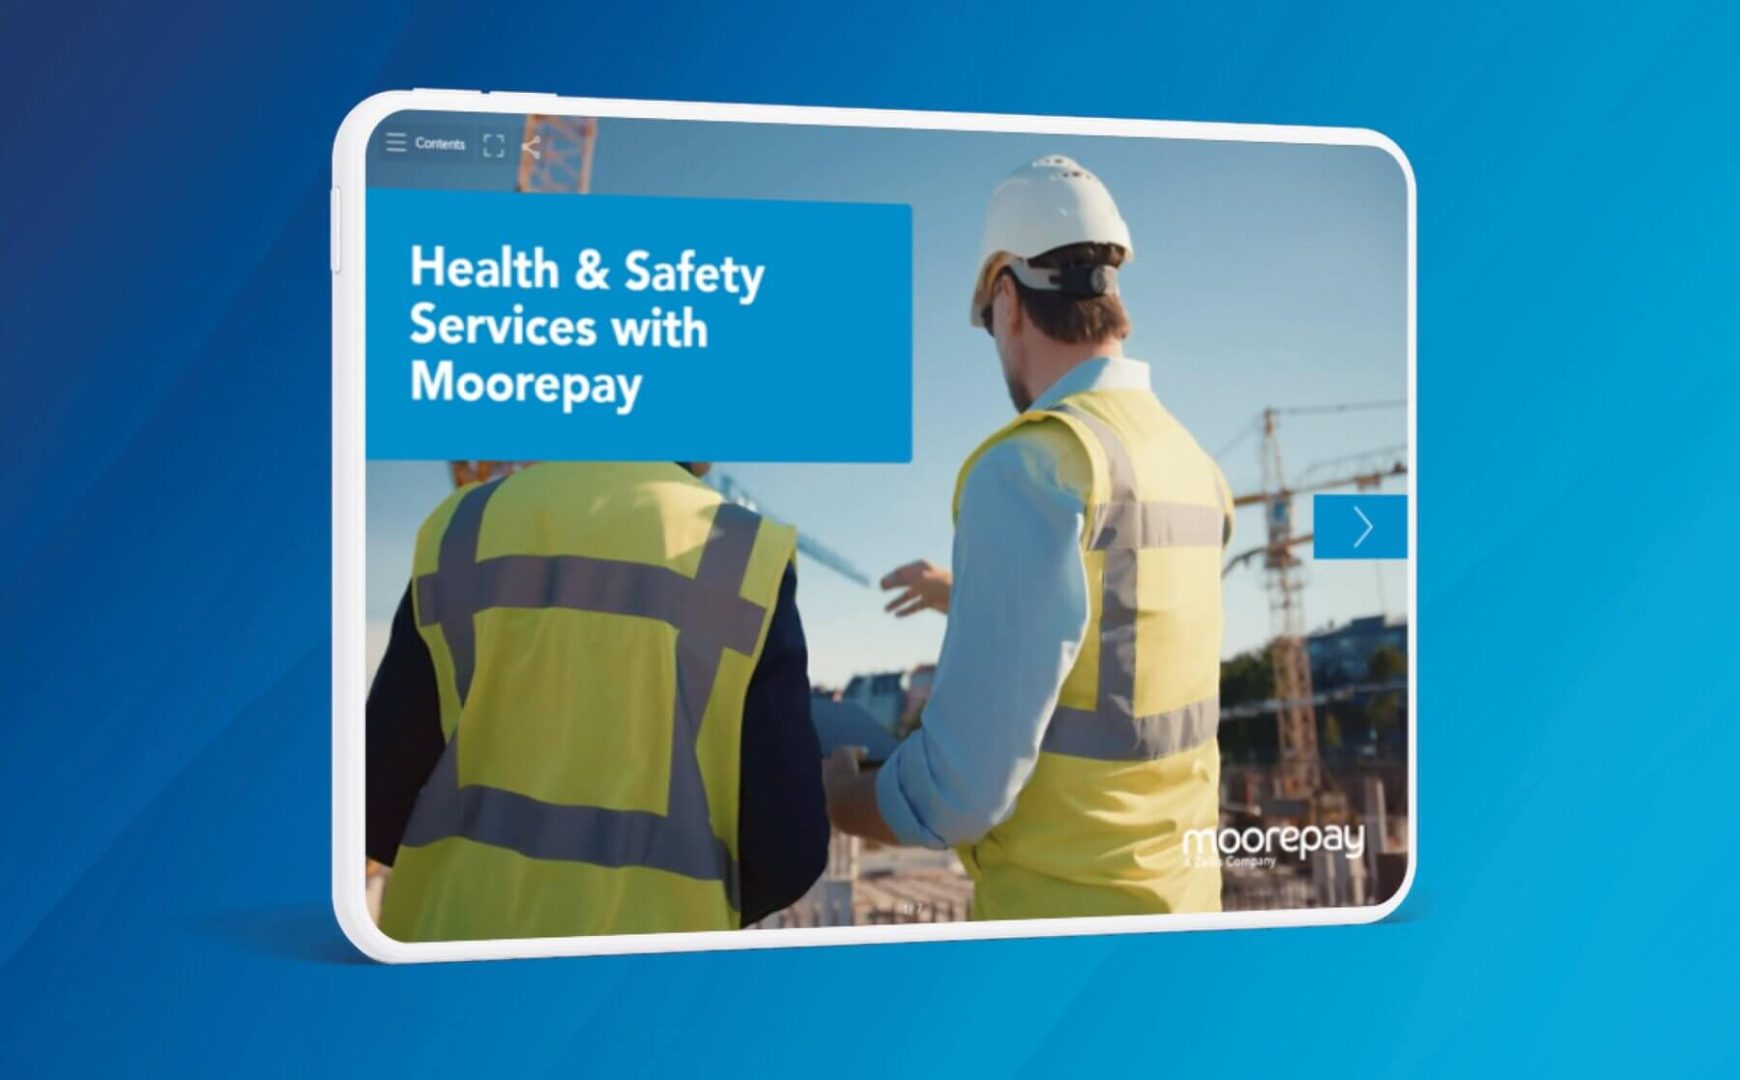 Health & Safety services with Moorepay